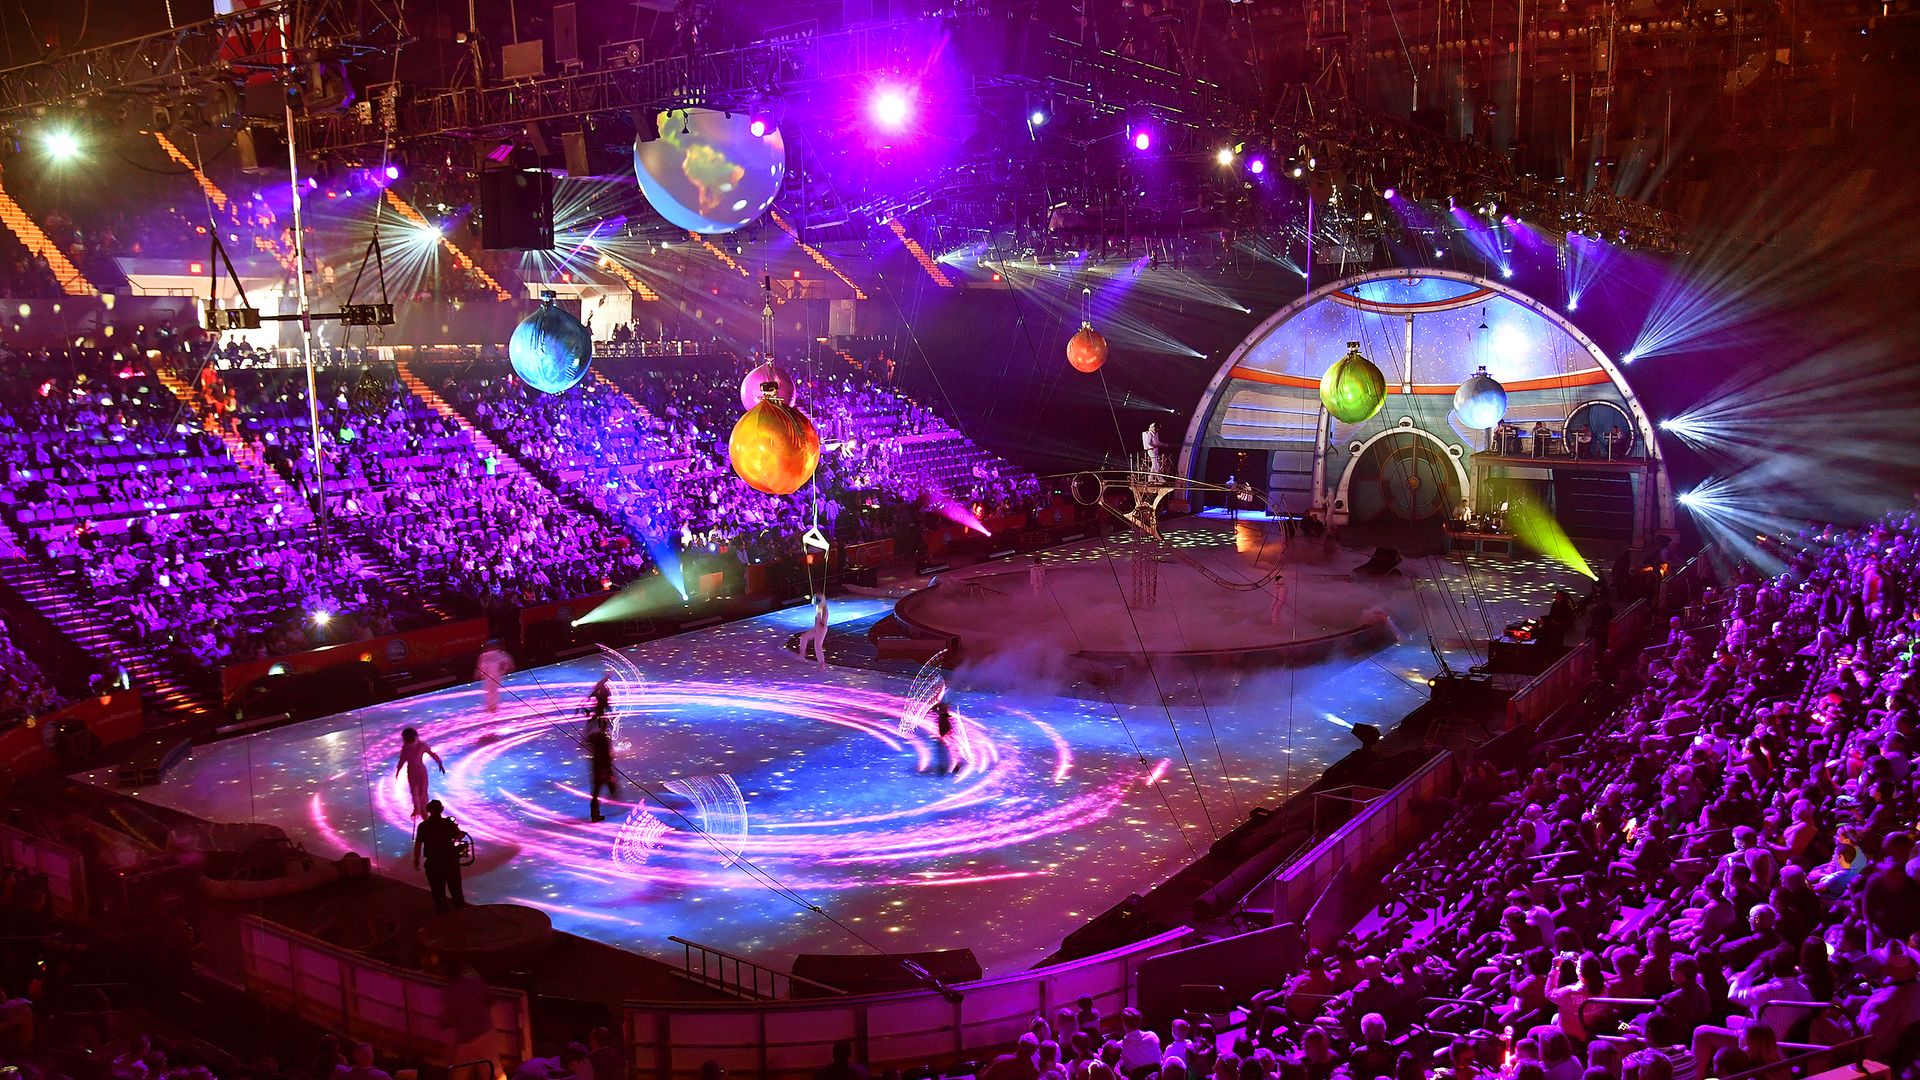 The final performance of the Ringling Bros. and Barnum & Bailey circus in 2017, with swirling movement in the center and planet-like decor hanging from the venue.